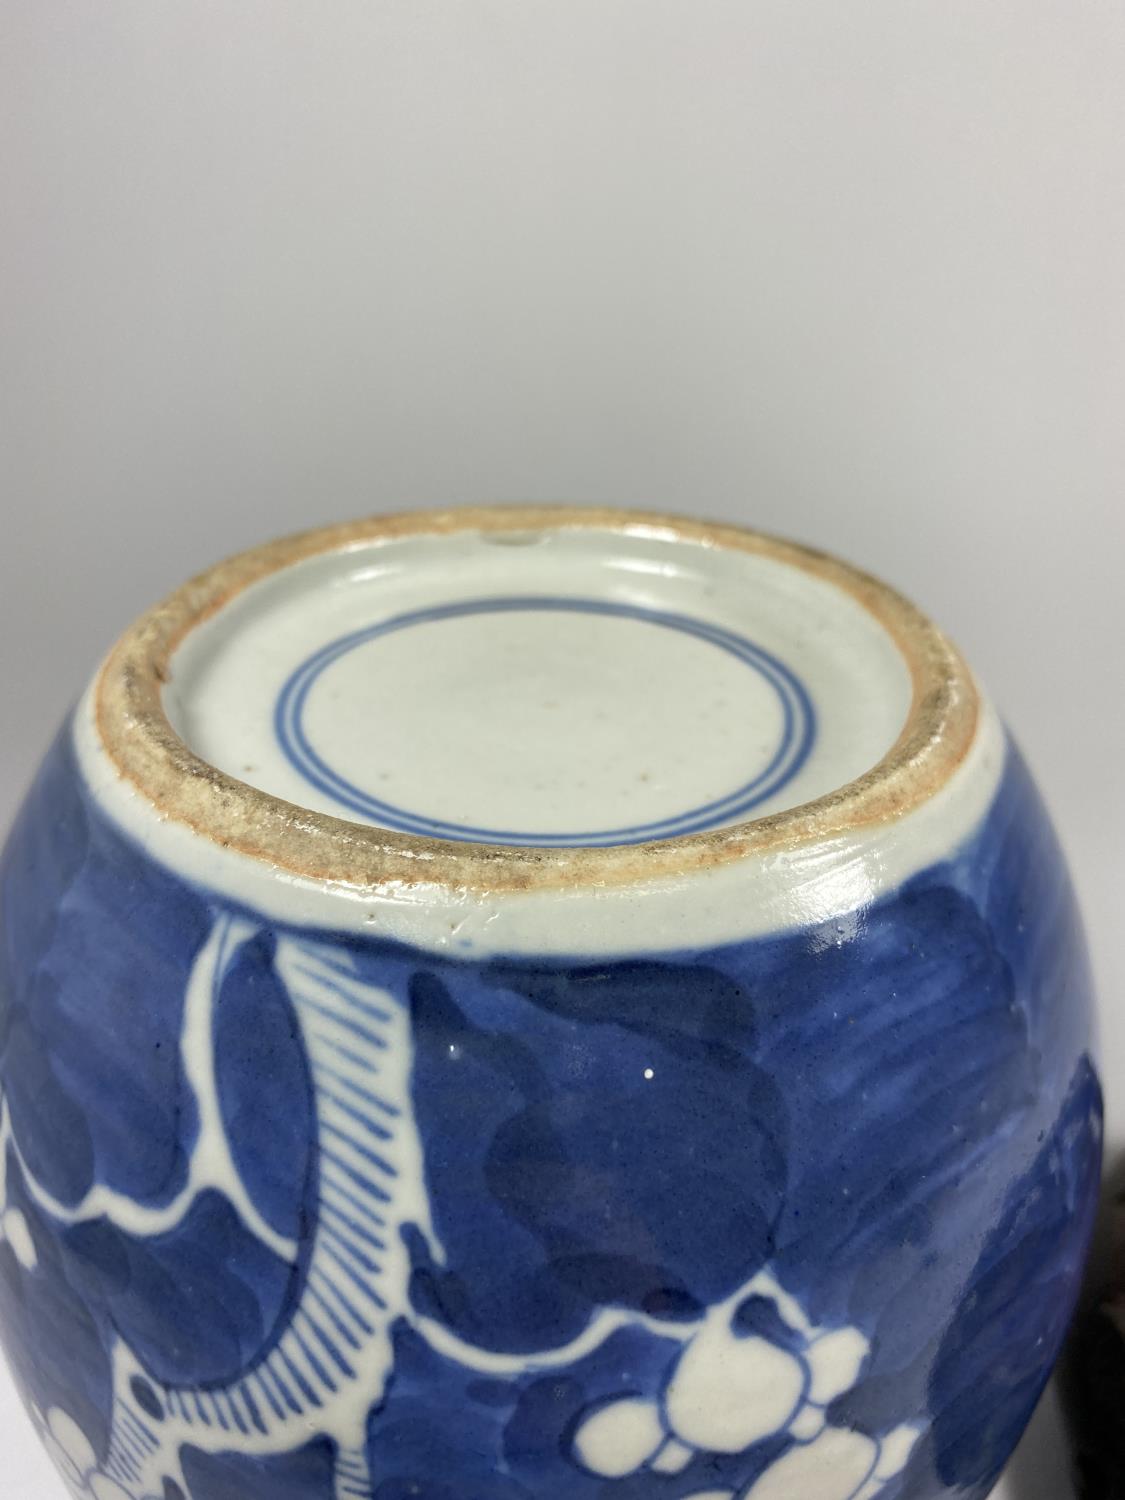 A LATE 19TH CENTURY CHINESE PORCELAIN PRUNUS BLOSSOM PATTERN GINGER JAR ON WOODEN BASE, DOUBLE - Image 5 of 7